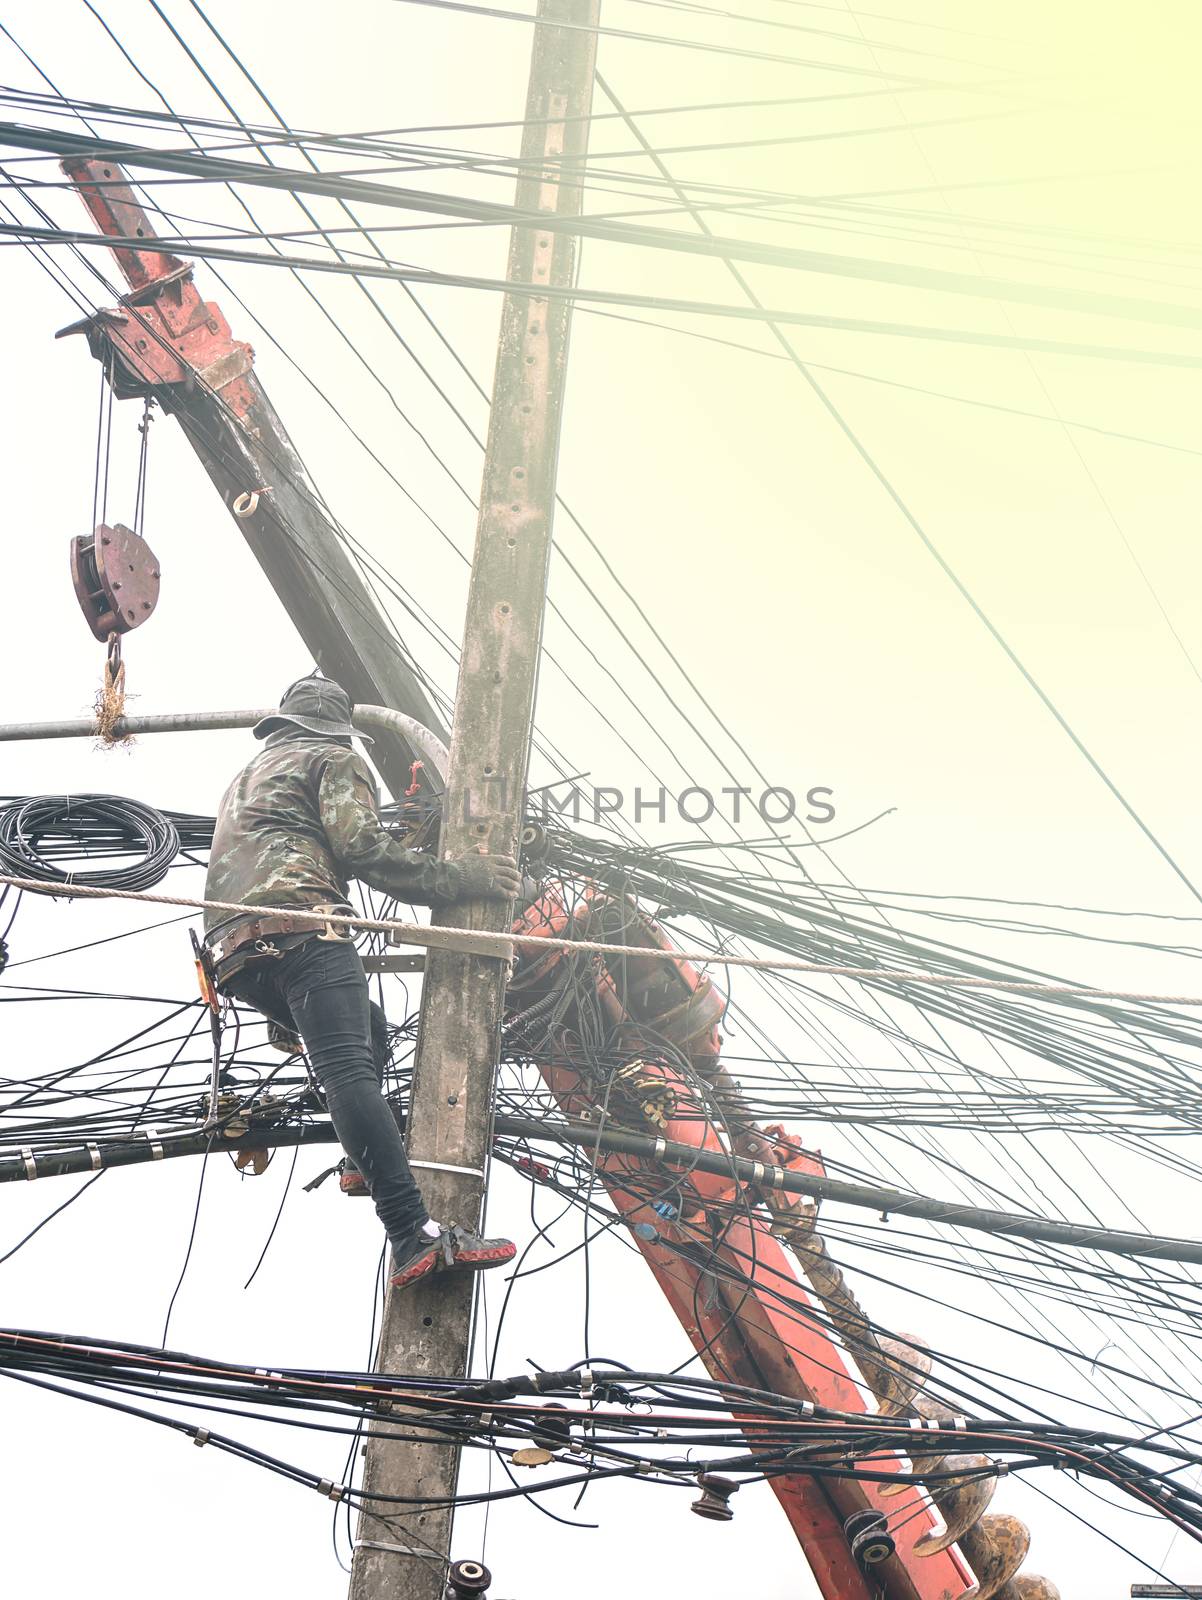 Repair workers are swinging on cable posts to fix the line of in by hadkhanong